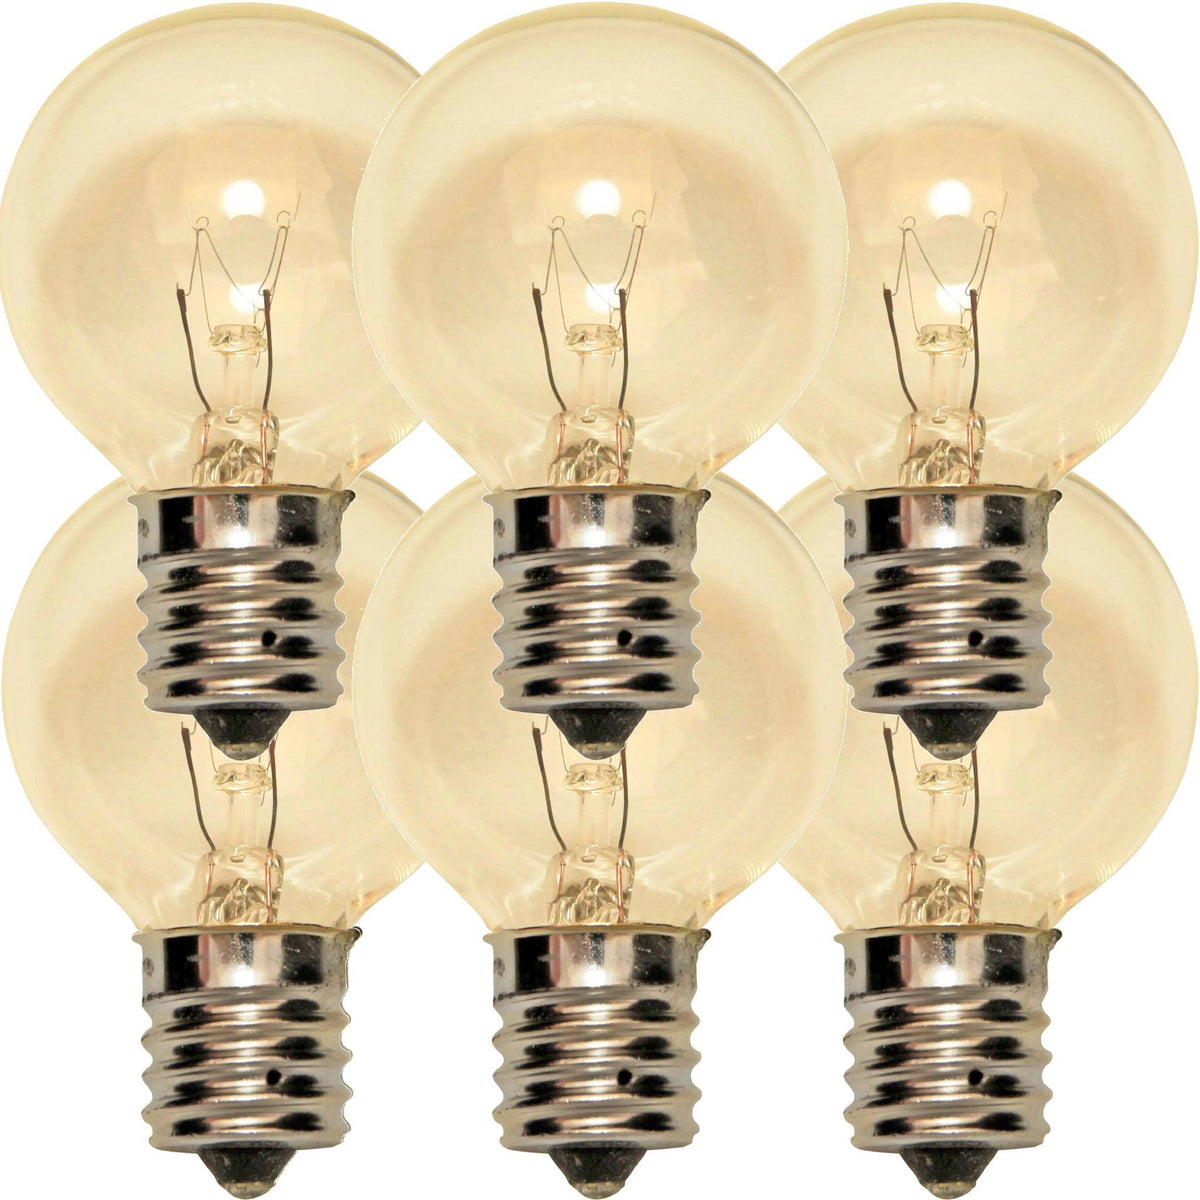 1 Box of 25 of brand new transparent Multi-Color G40 Globe Light Bulbs Replace your old bulbs today at leedisplay.com